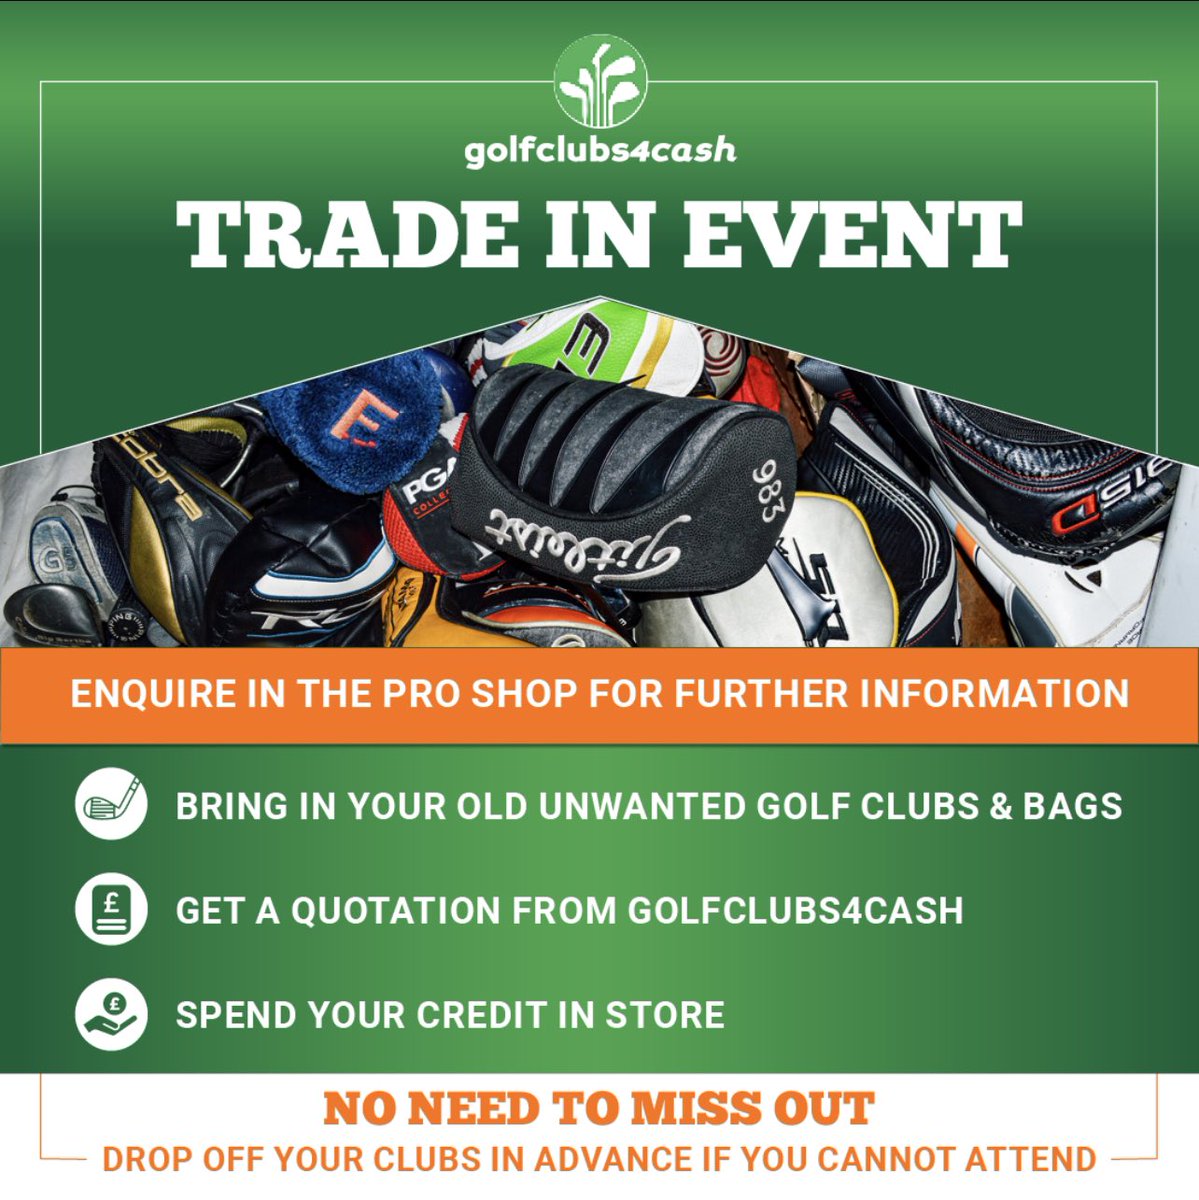 Bring your old clubs in this Wednesday and we will exchange them for credit in store - join us from 3pm until 6pm